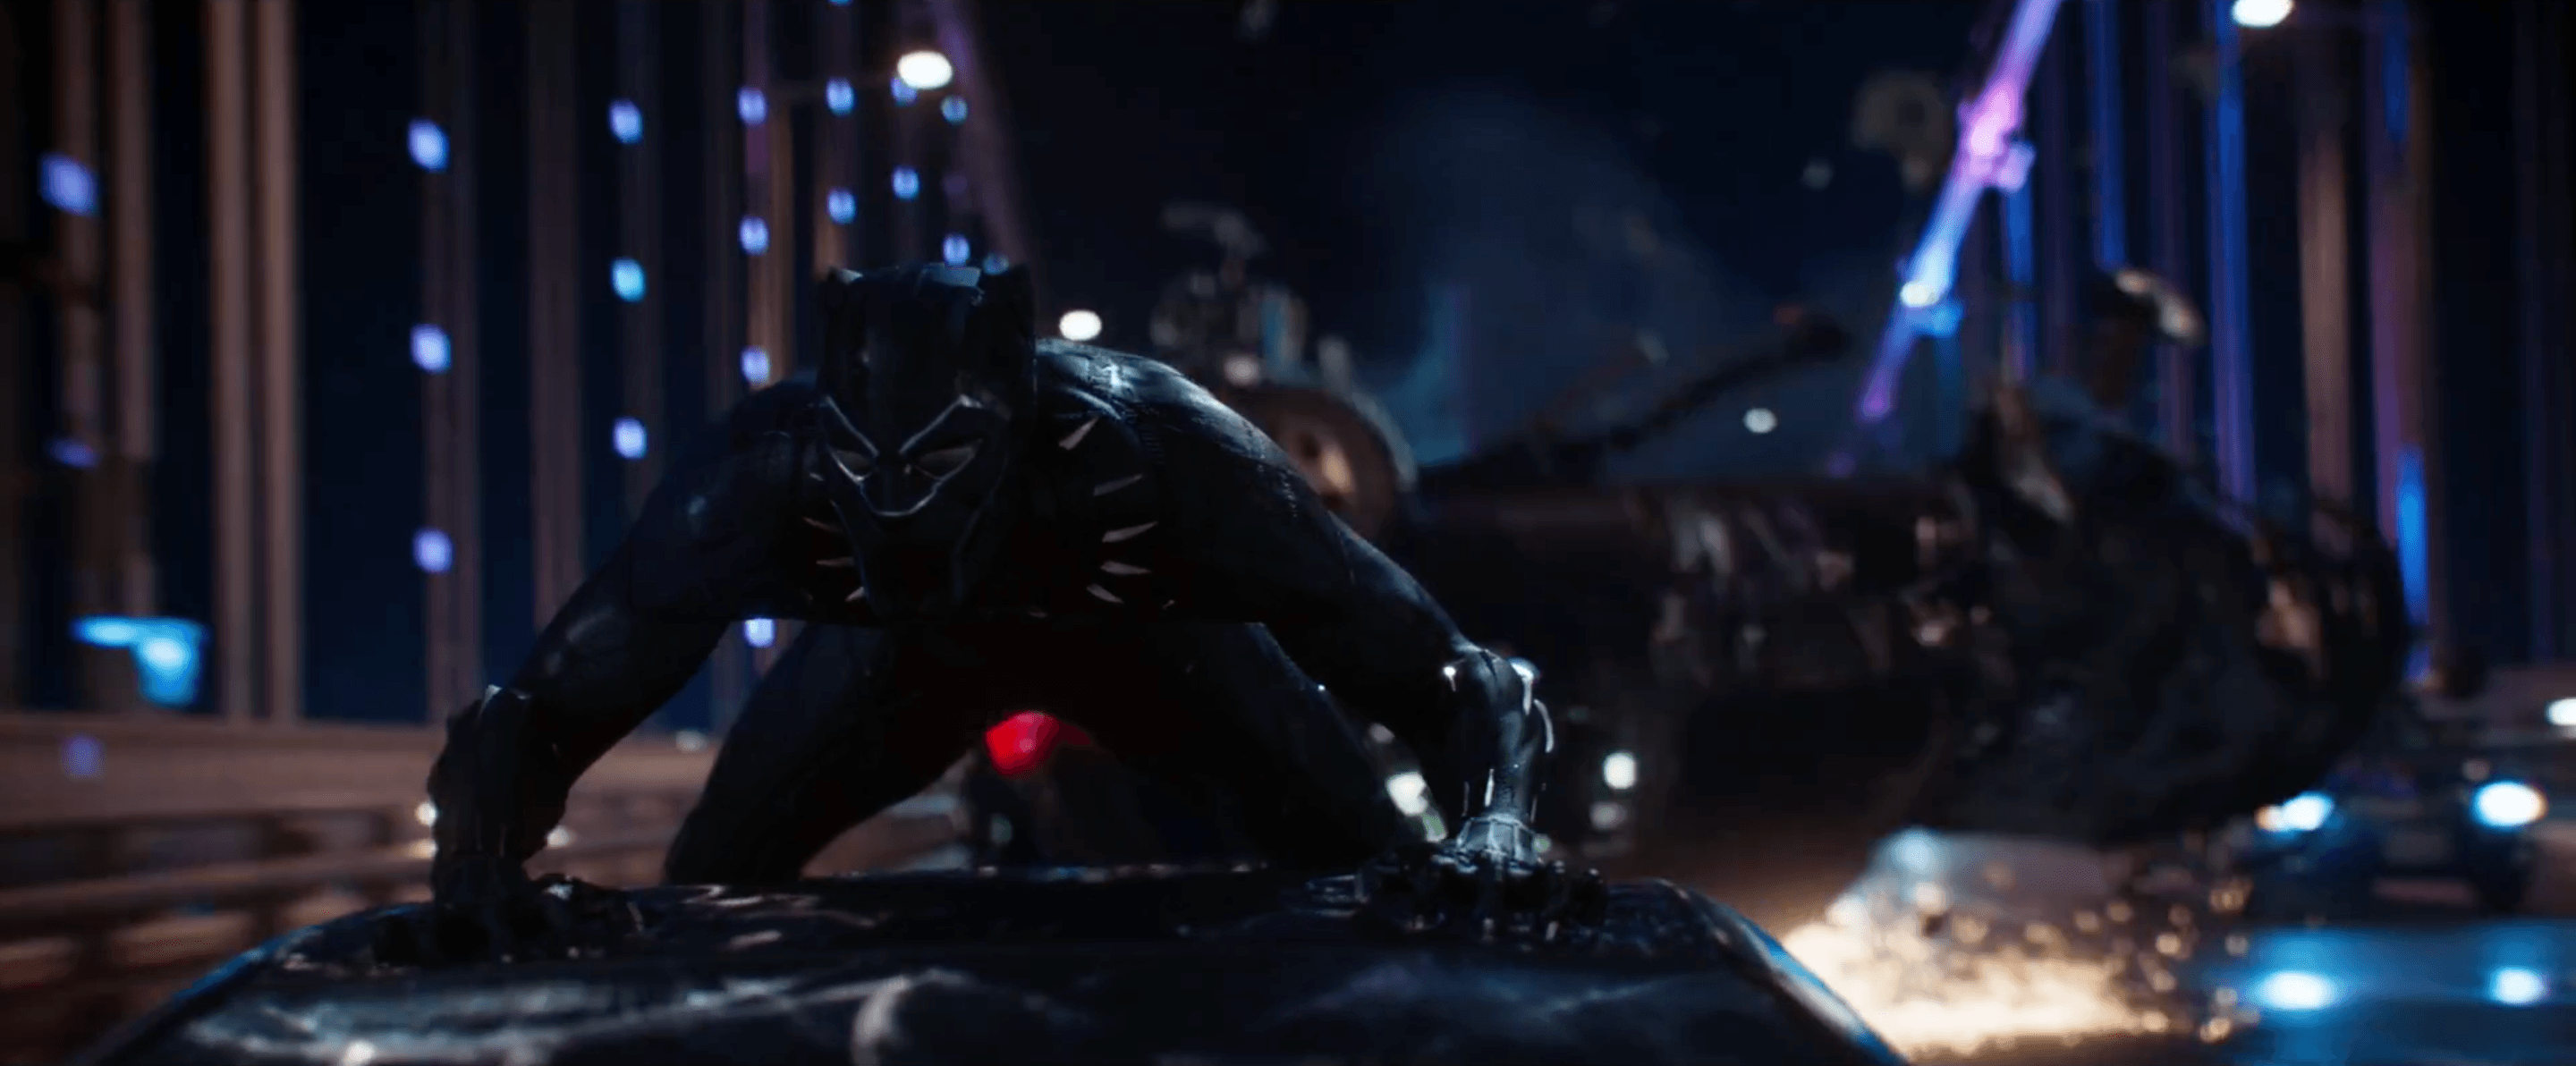 Marvel Releases First Black Panther Trailer